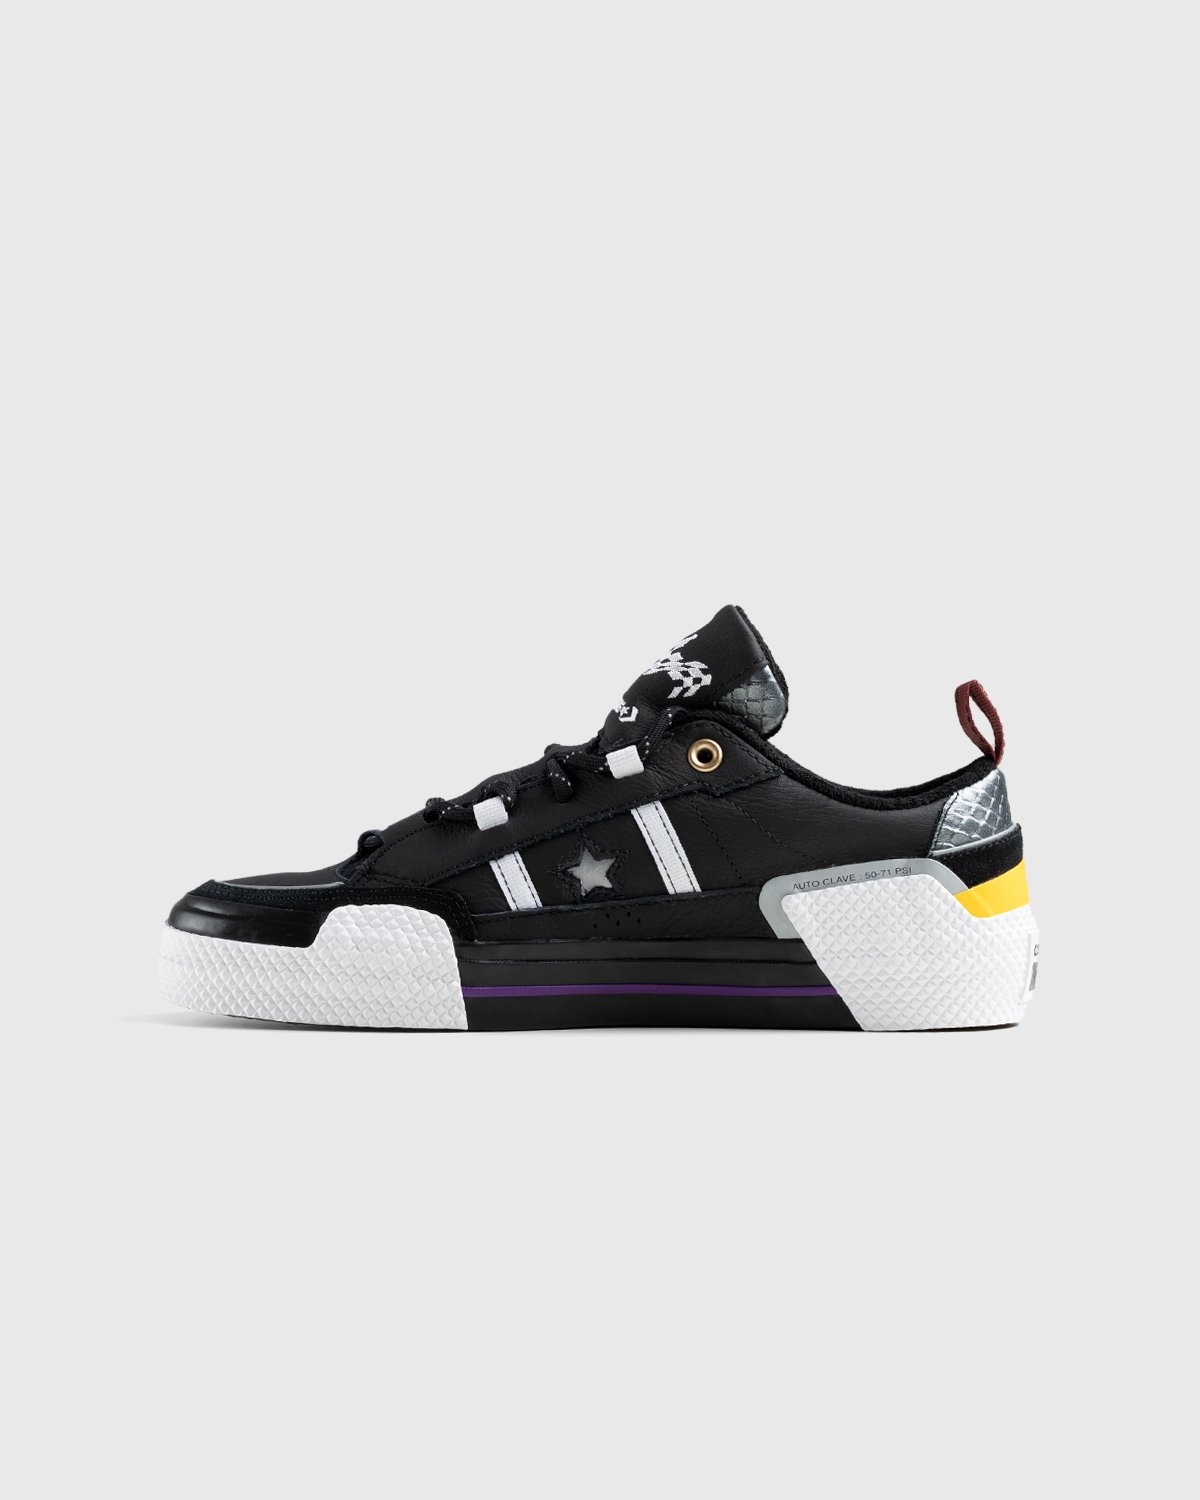 Converse x IBN Japser – One Star Ox Black/White/Spectra Yellow - Sneakers - Black - Image 2